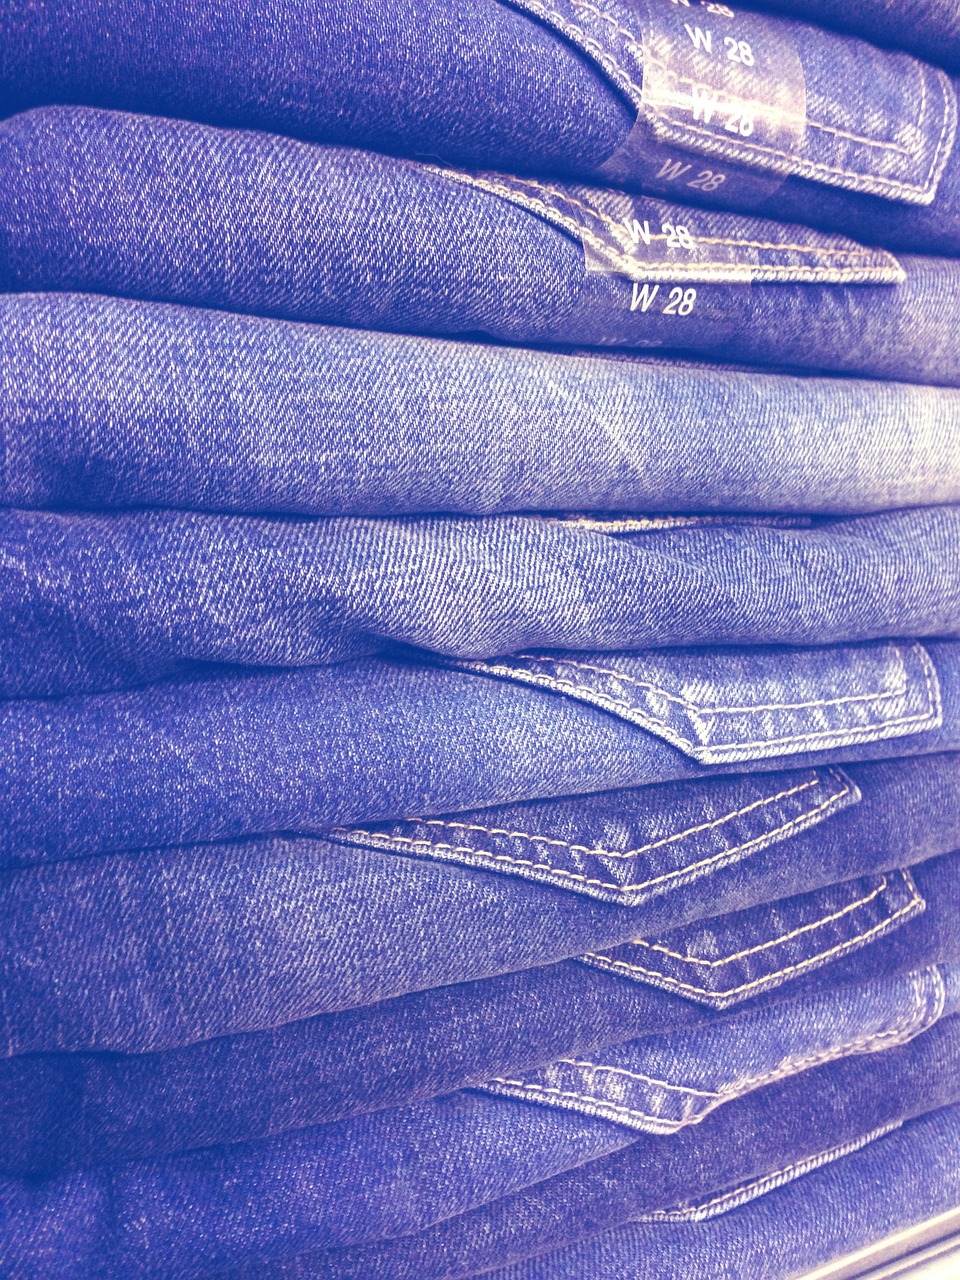 jeans jeans stack pants